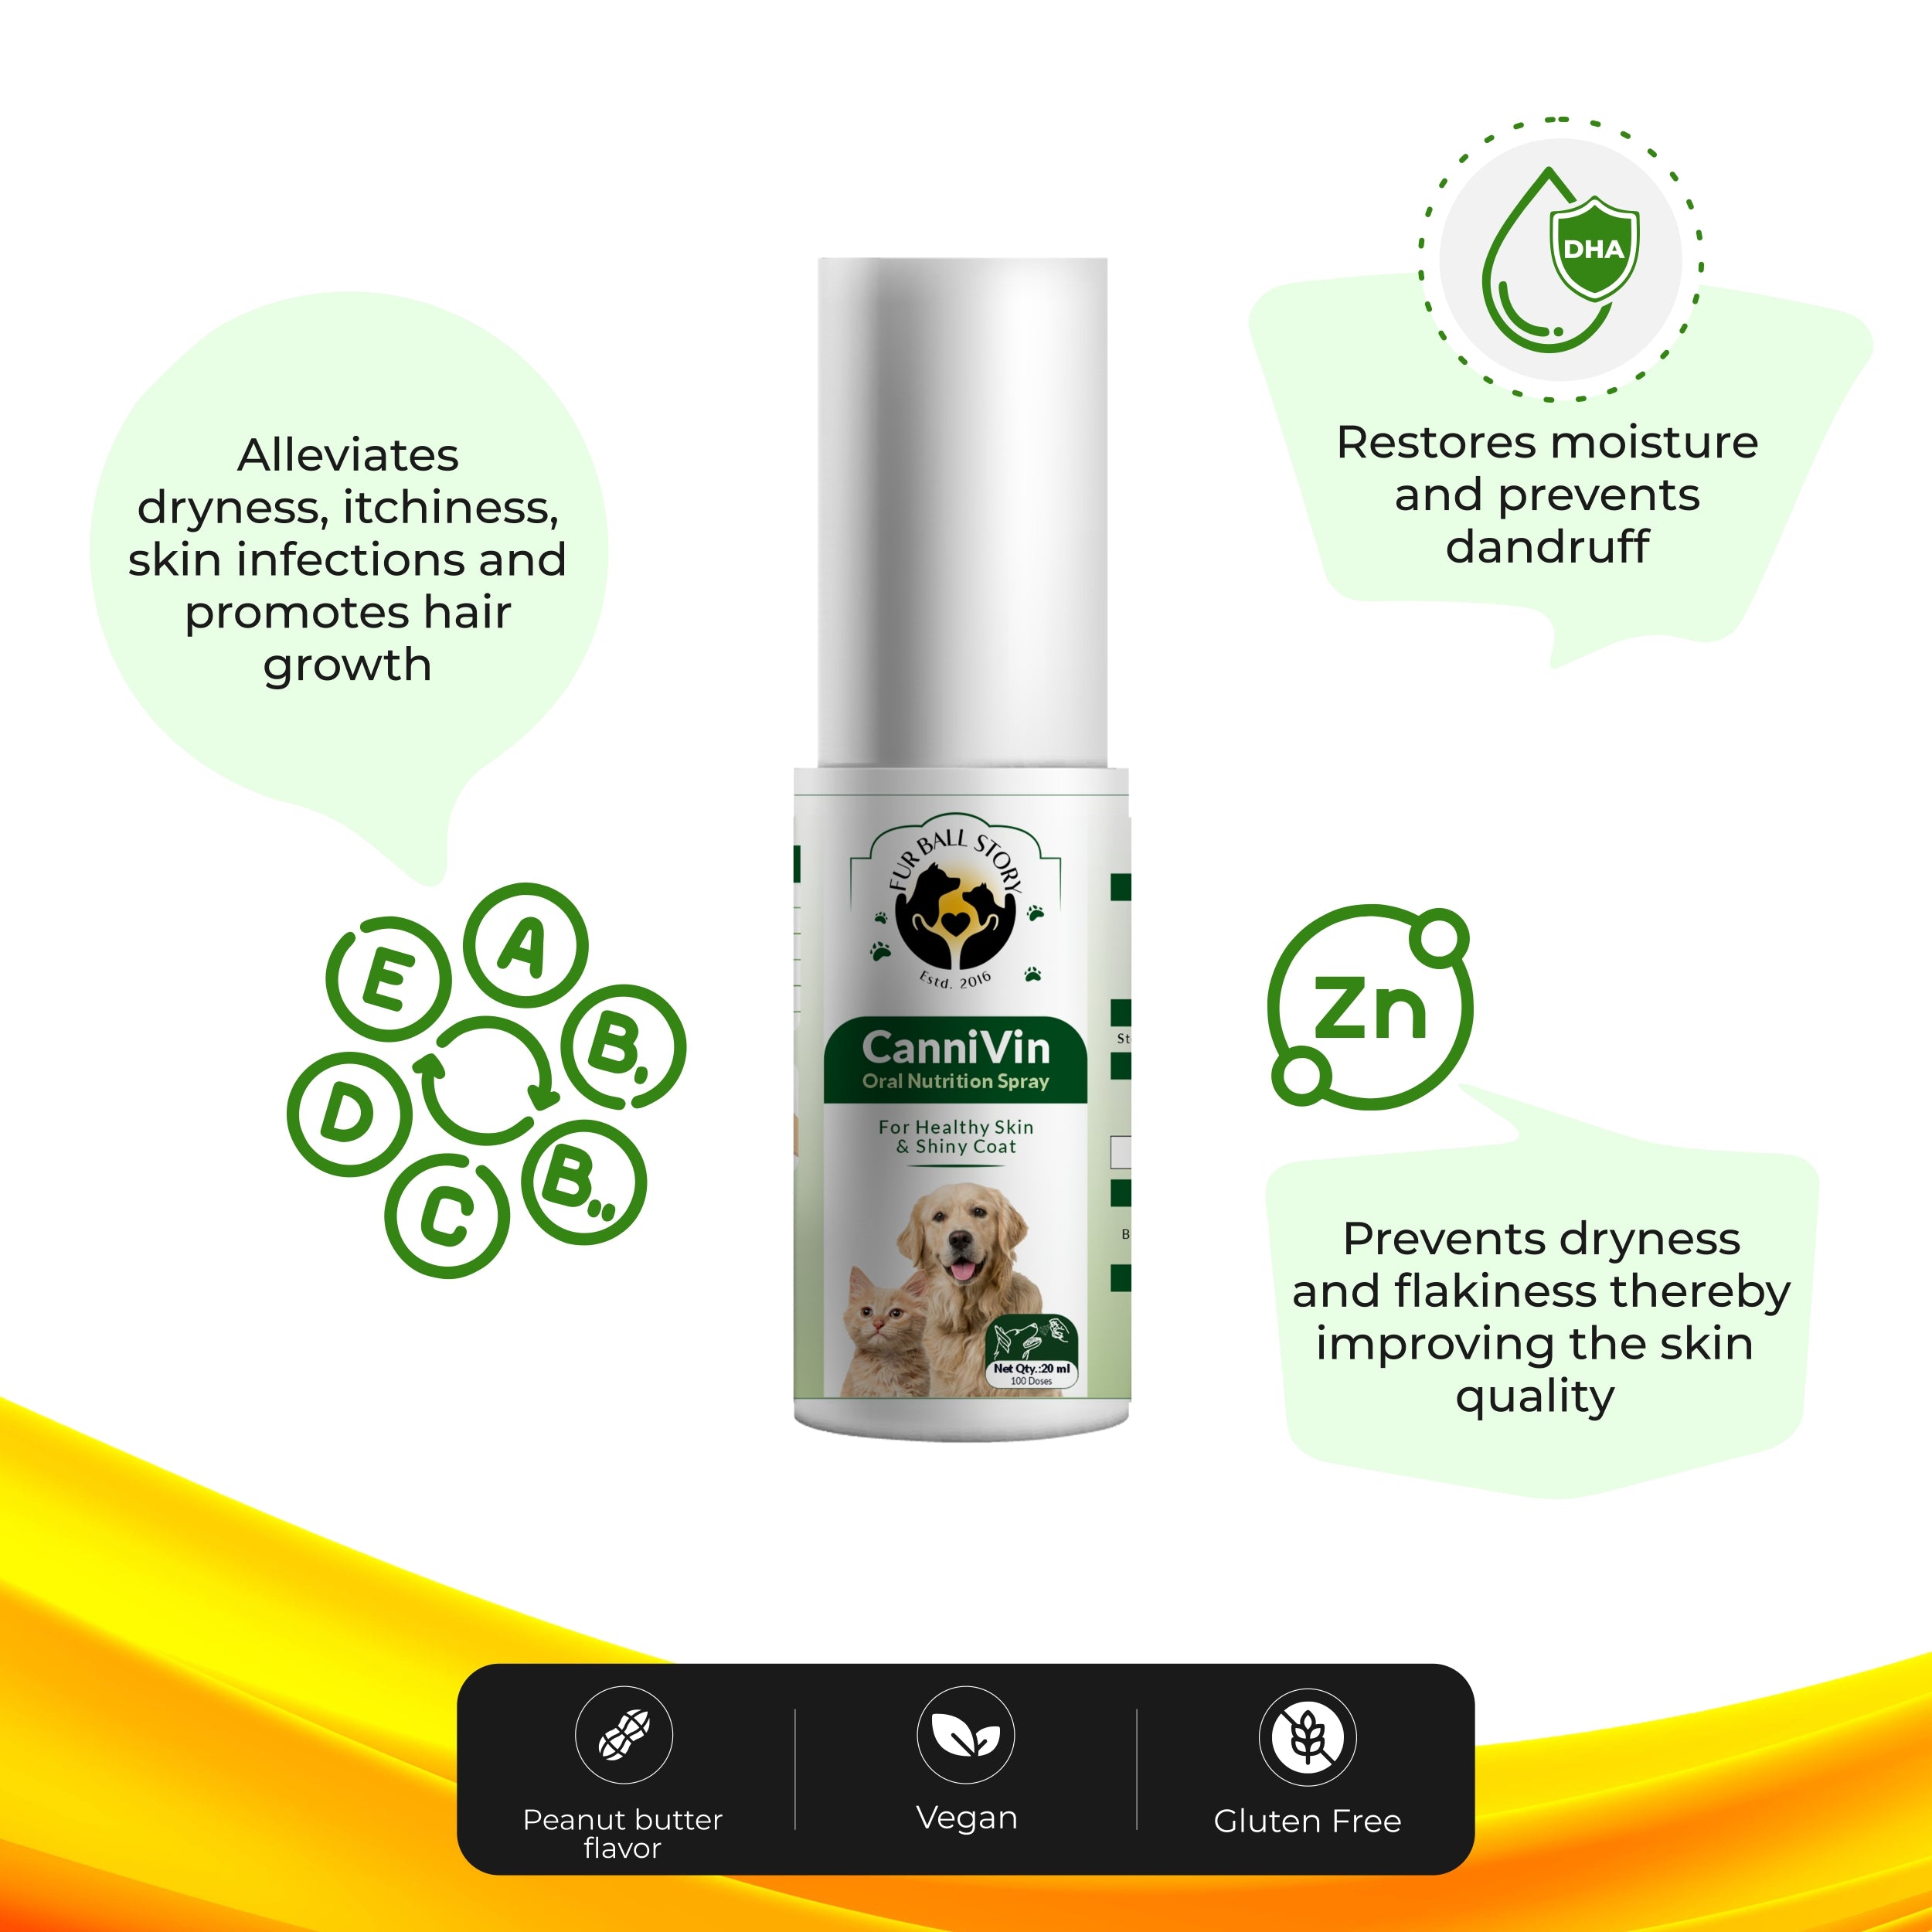 CanniVin Spray: For Healthy Skin & Shiny Coat In Dogs & Cats - 20ml 